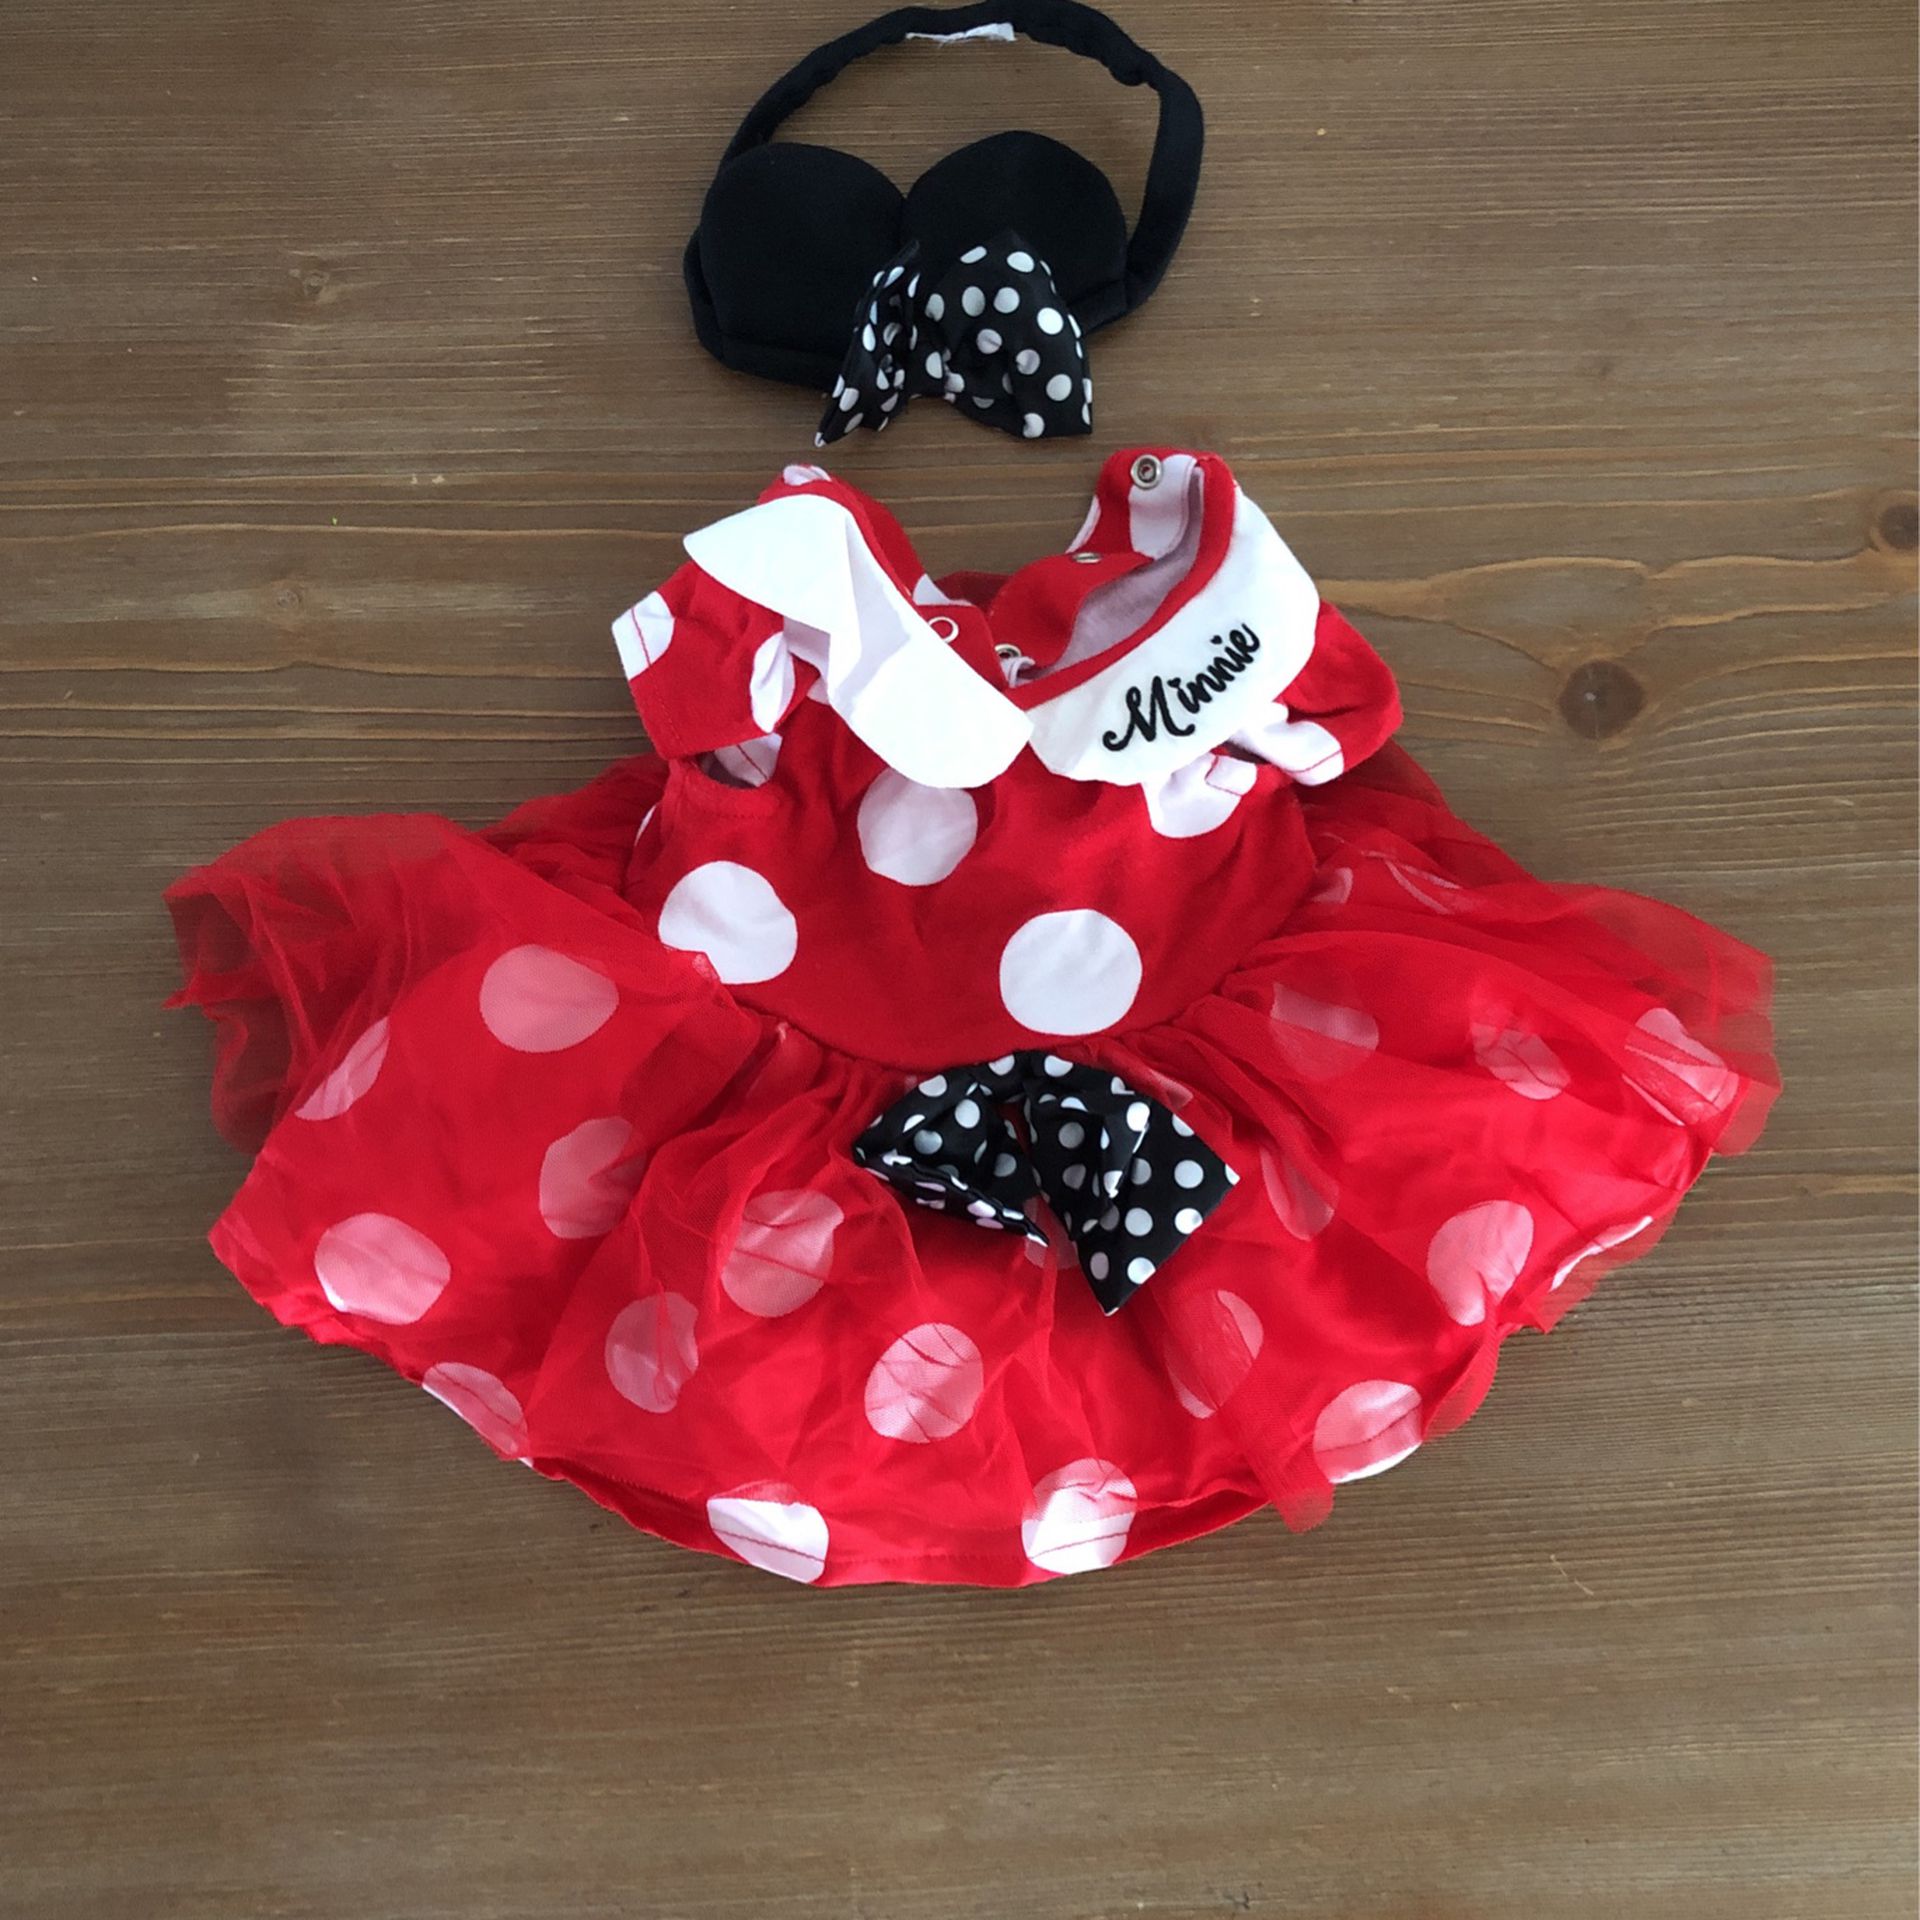 0-3 Month Minnie Mouse Costume 